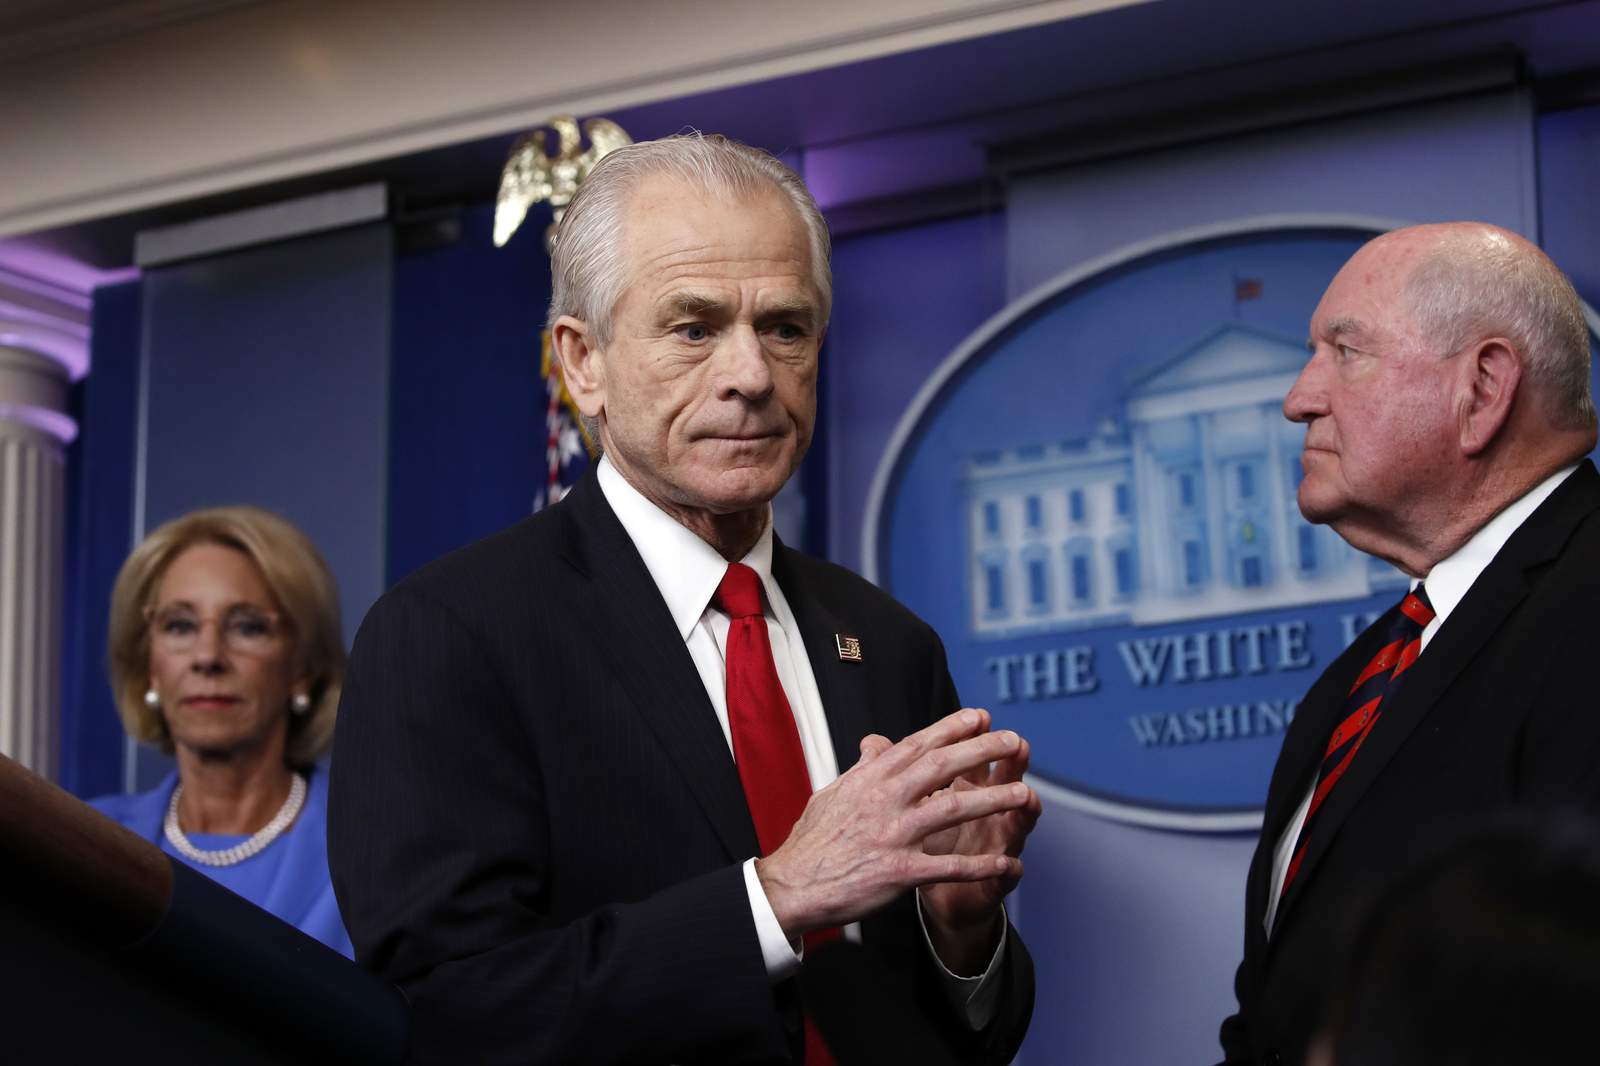 Peter Navarro on his qualifications to disagree with Dr. Anthony Fauci on coronavirus treatments: ‘I’m a social scientist’